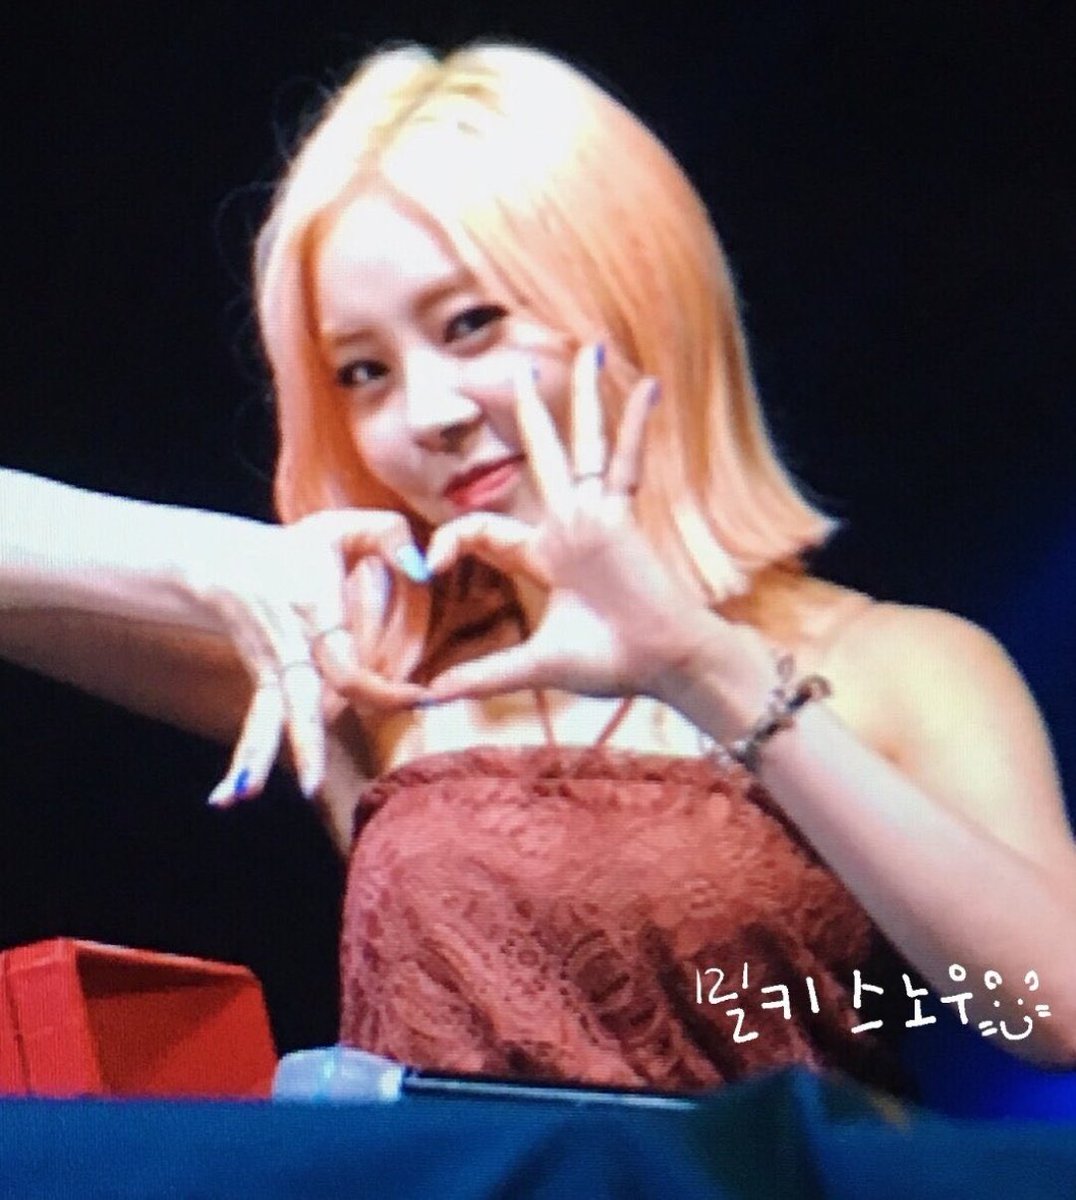 when she does this cute heart thing